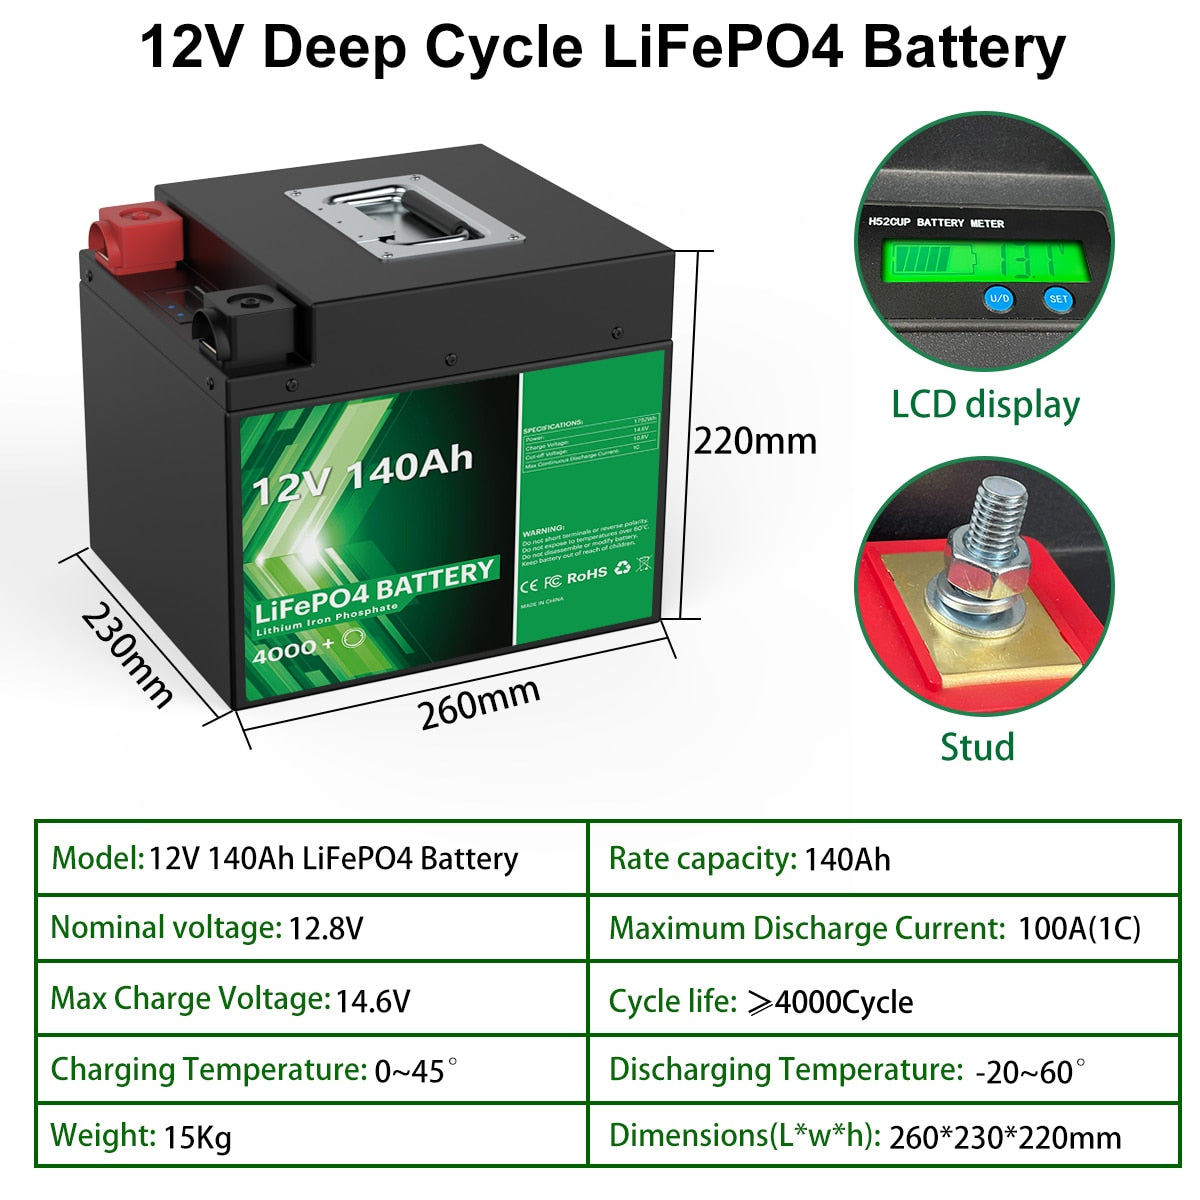 12V Deep Cycle LiFePO4 Battery Hs2cup